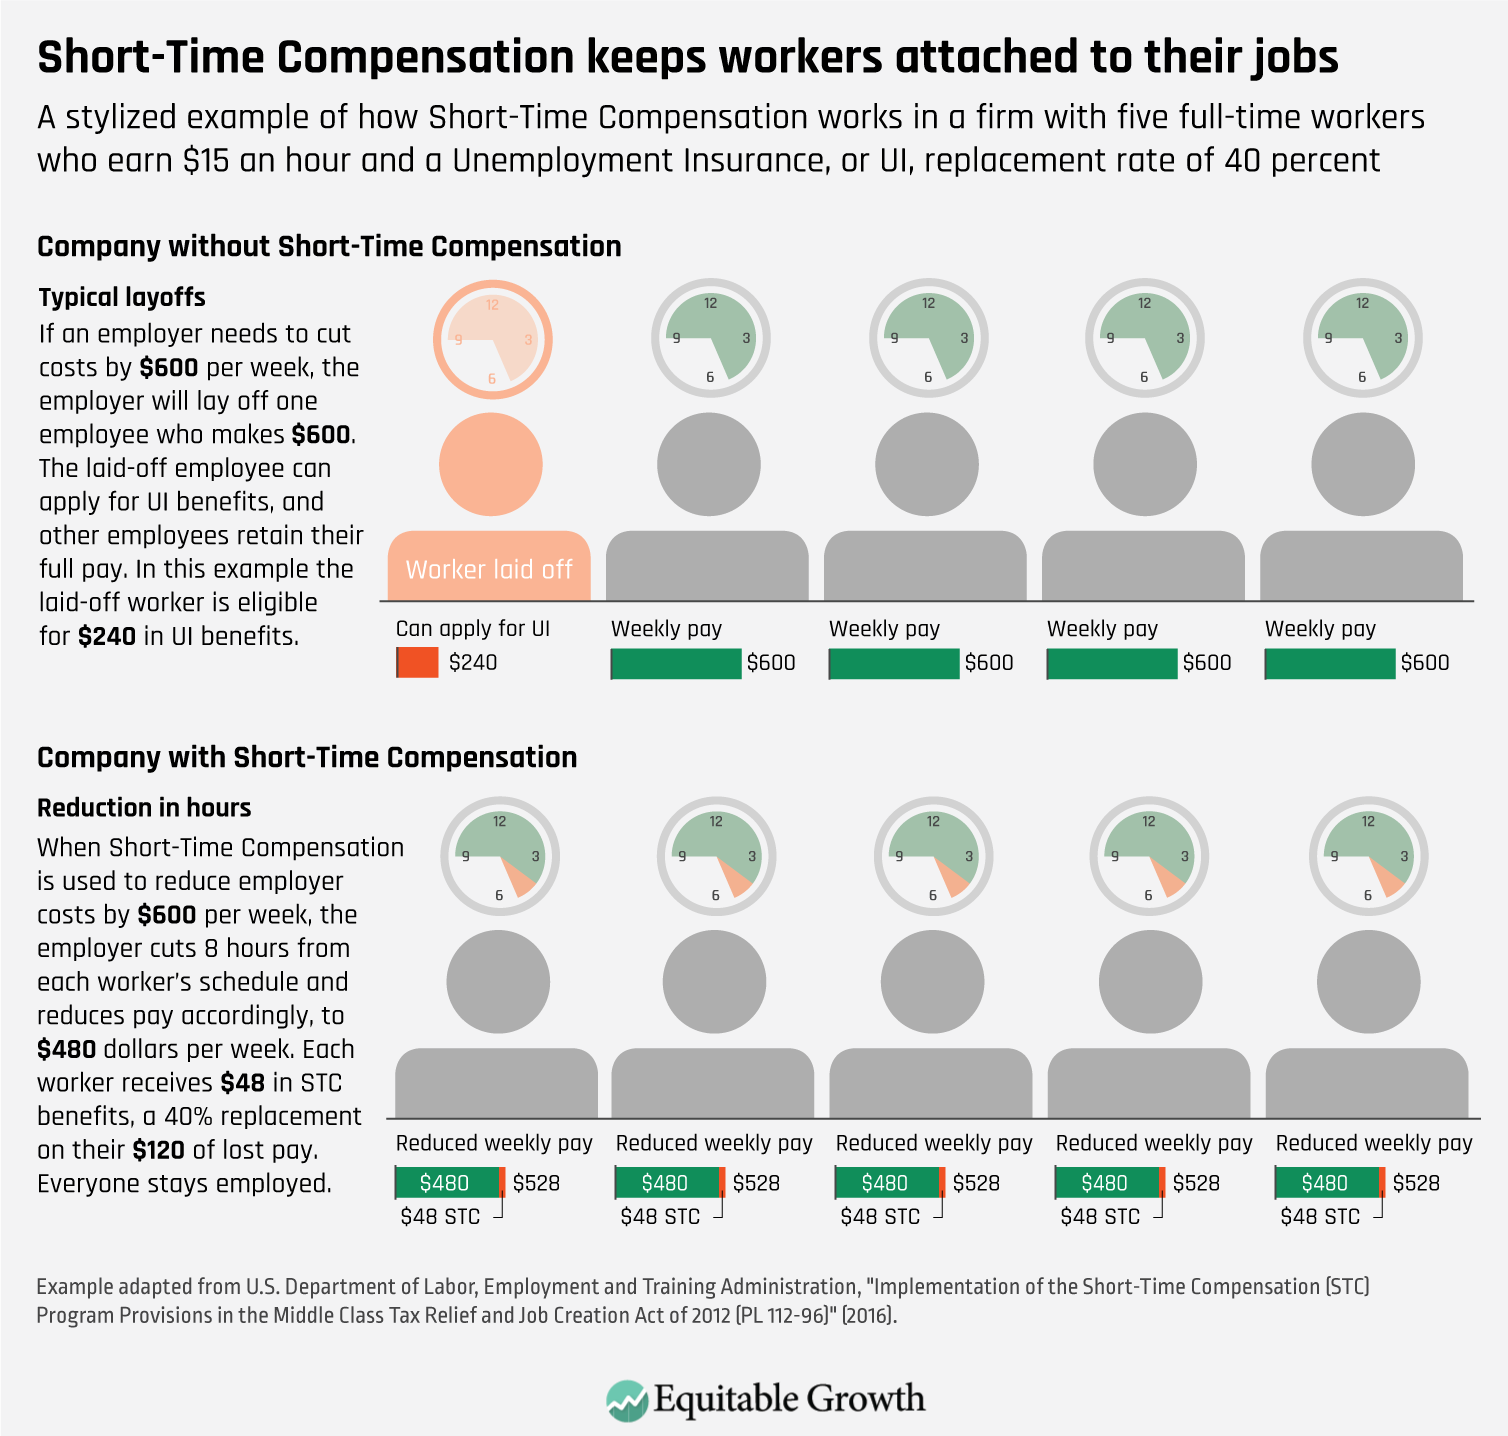 A stylized example of how Short-Time Compensation works in a firm with five full-time workers who earn $15 an hour and an Unemployment Insurance, or UI, replacement rate of 40 percent